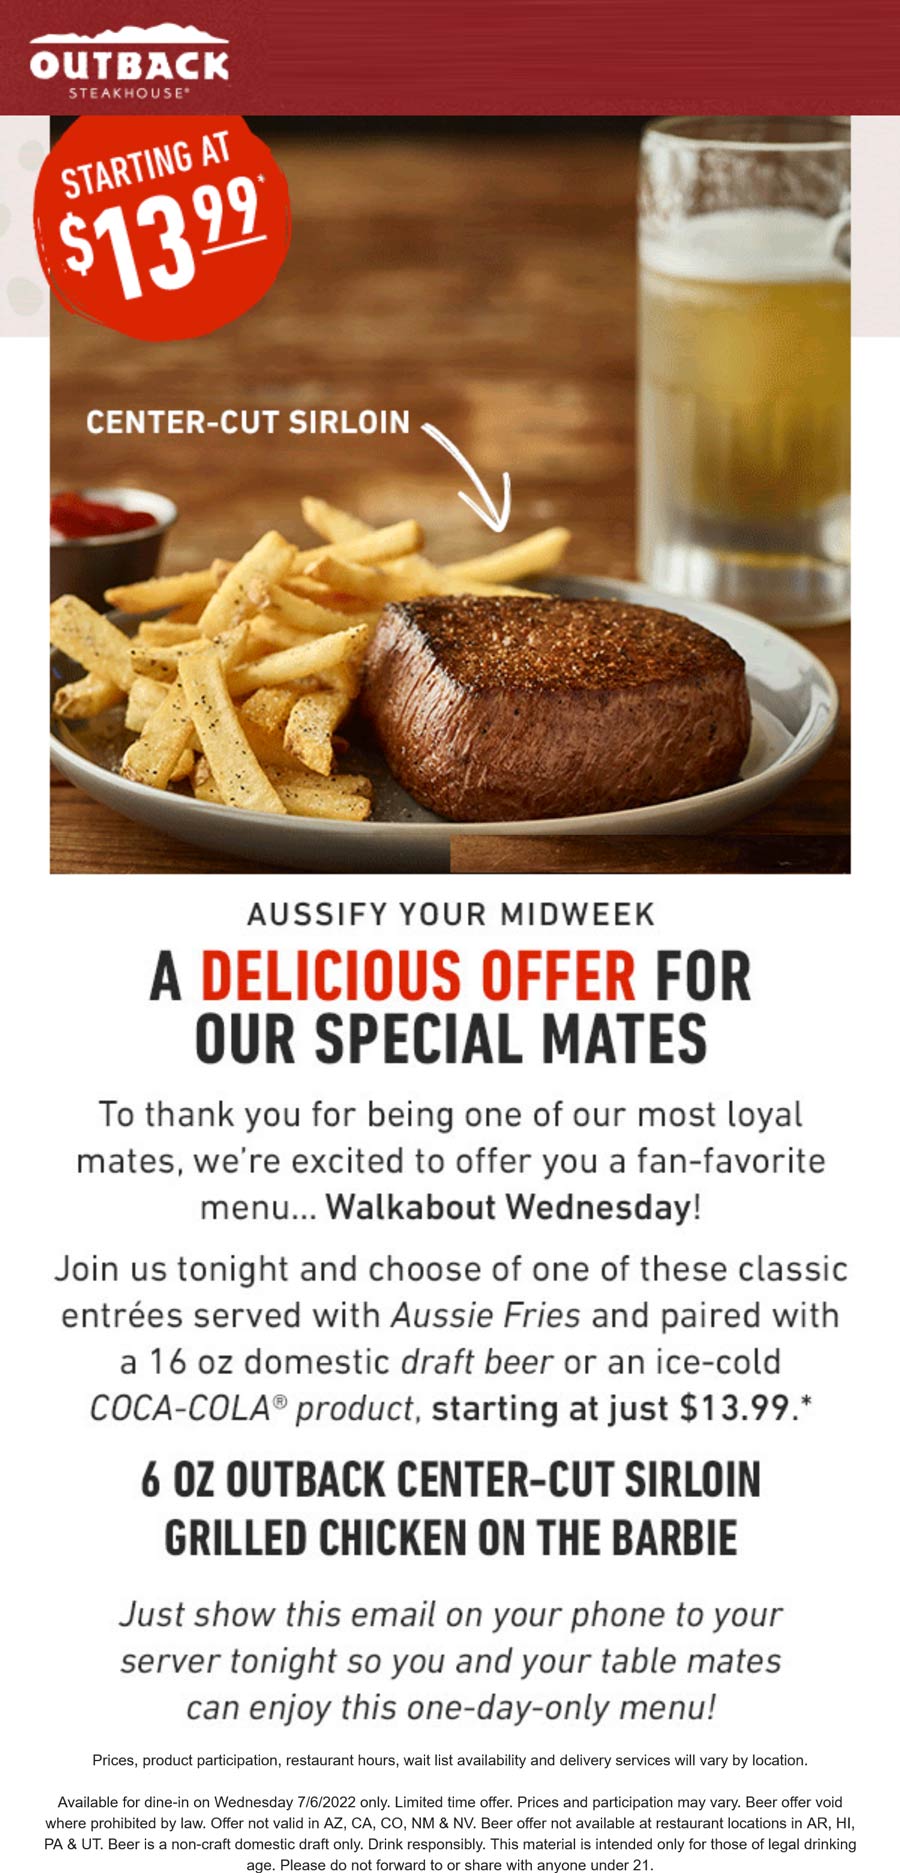 Outback Steakhouse restaurants Coupon  Sirloin steak or chicken + fries + beer = $14 today at Outback Steakhouse #outbacksteakhouse 